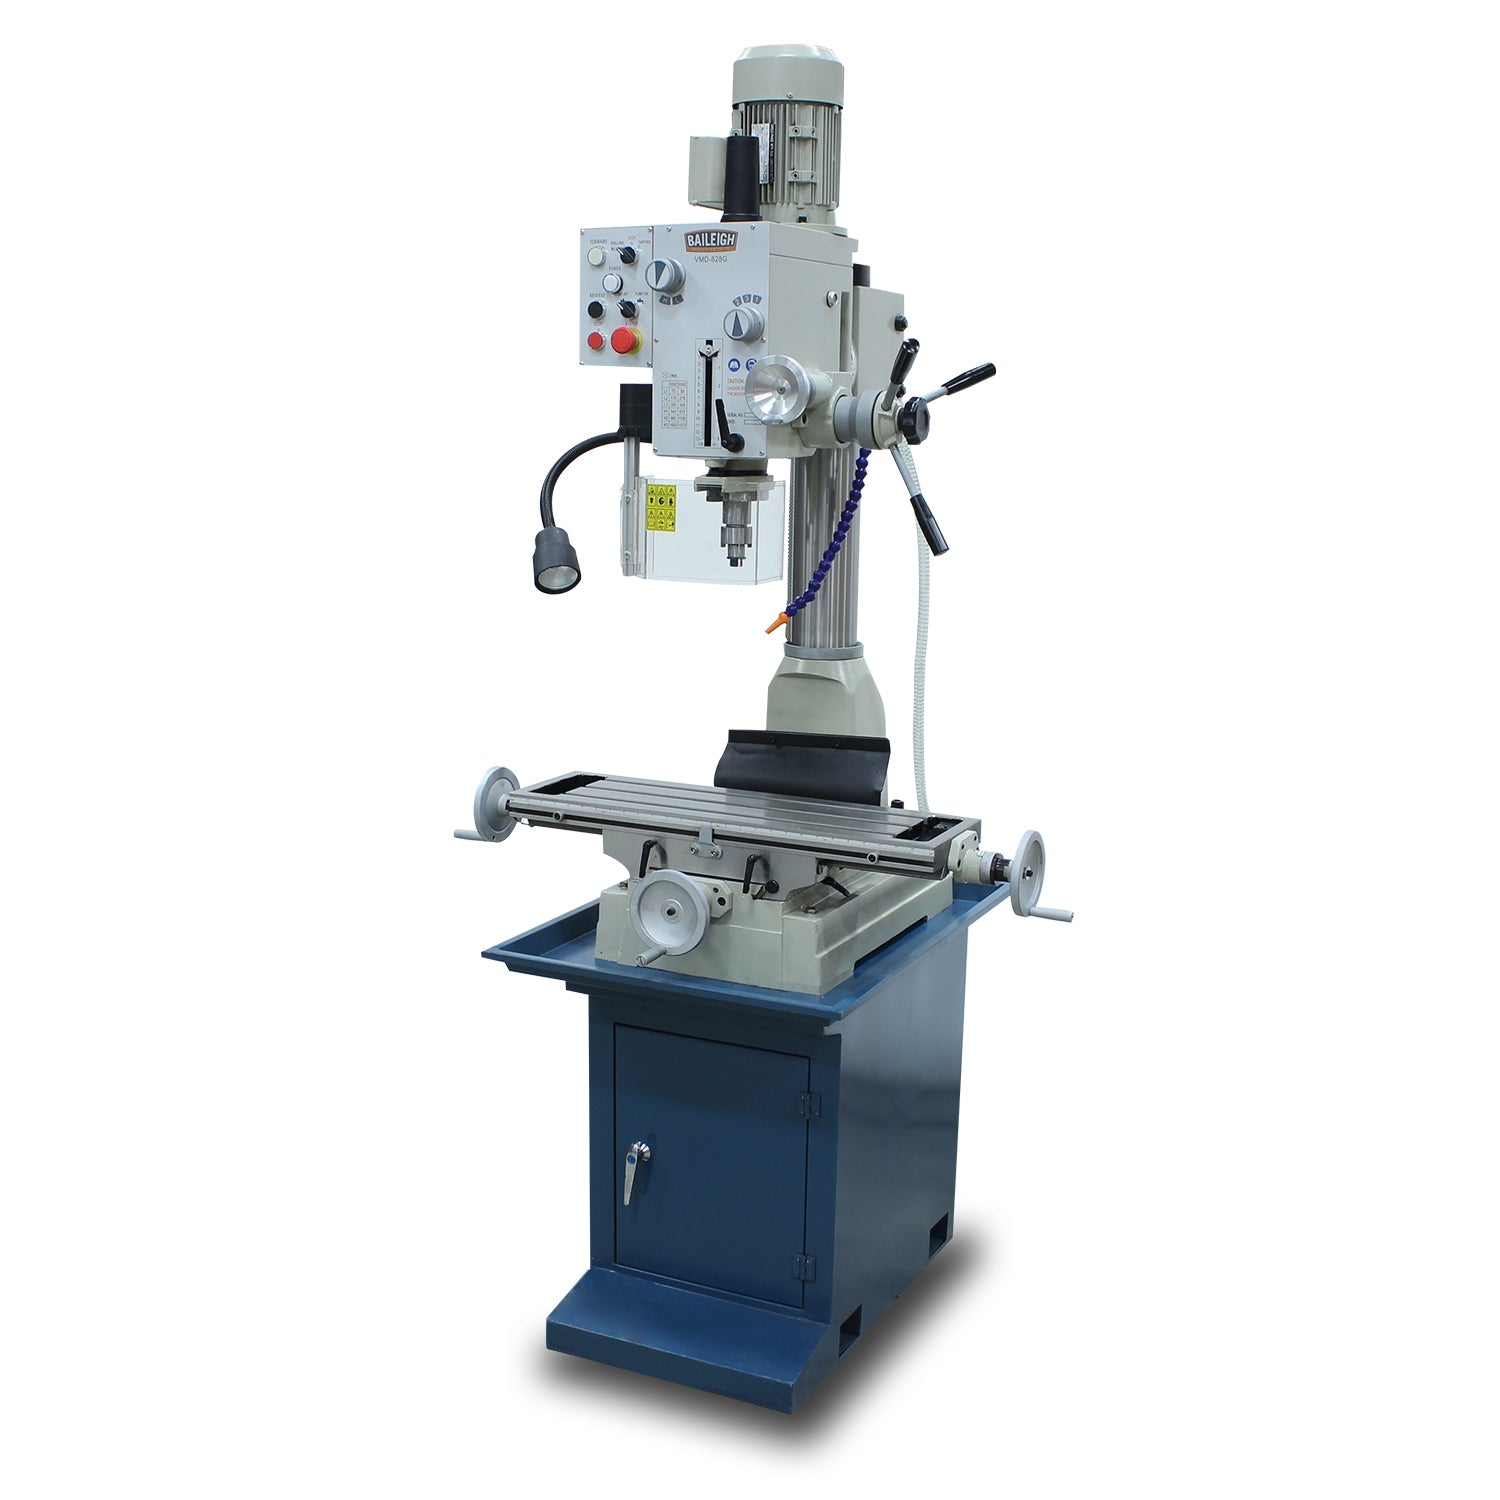 Baileigh VMD-828G 110V Gear Driven Mill and Drill, Includes Stand, Coolant System, Work Light, and R8 Spindle